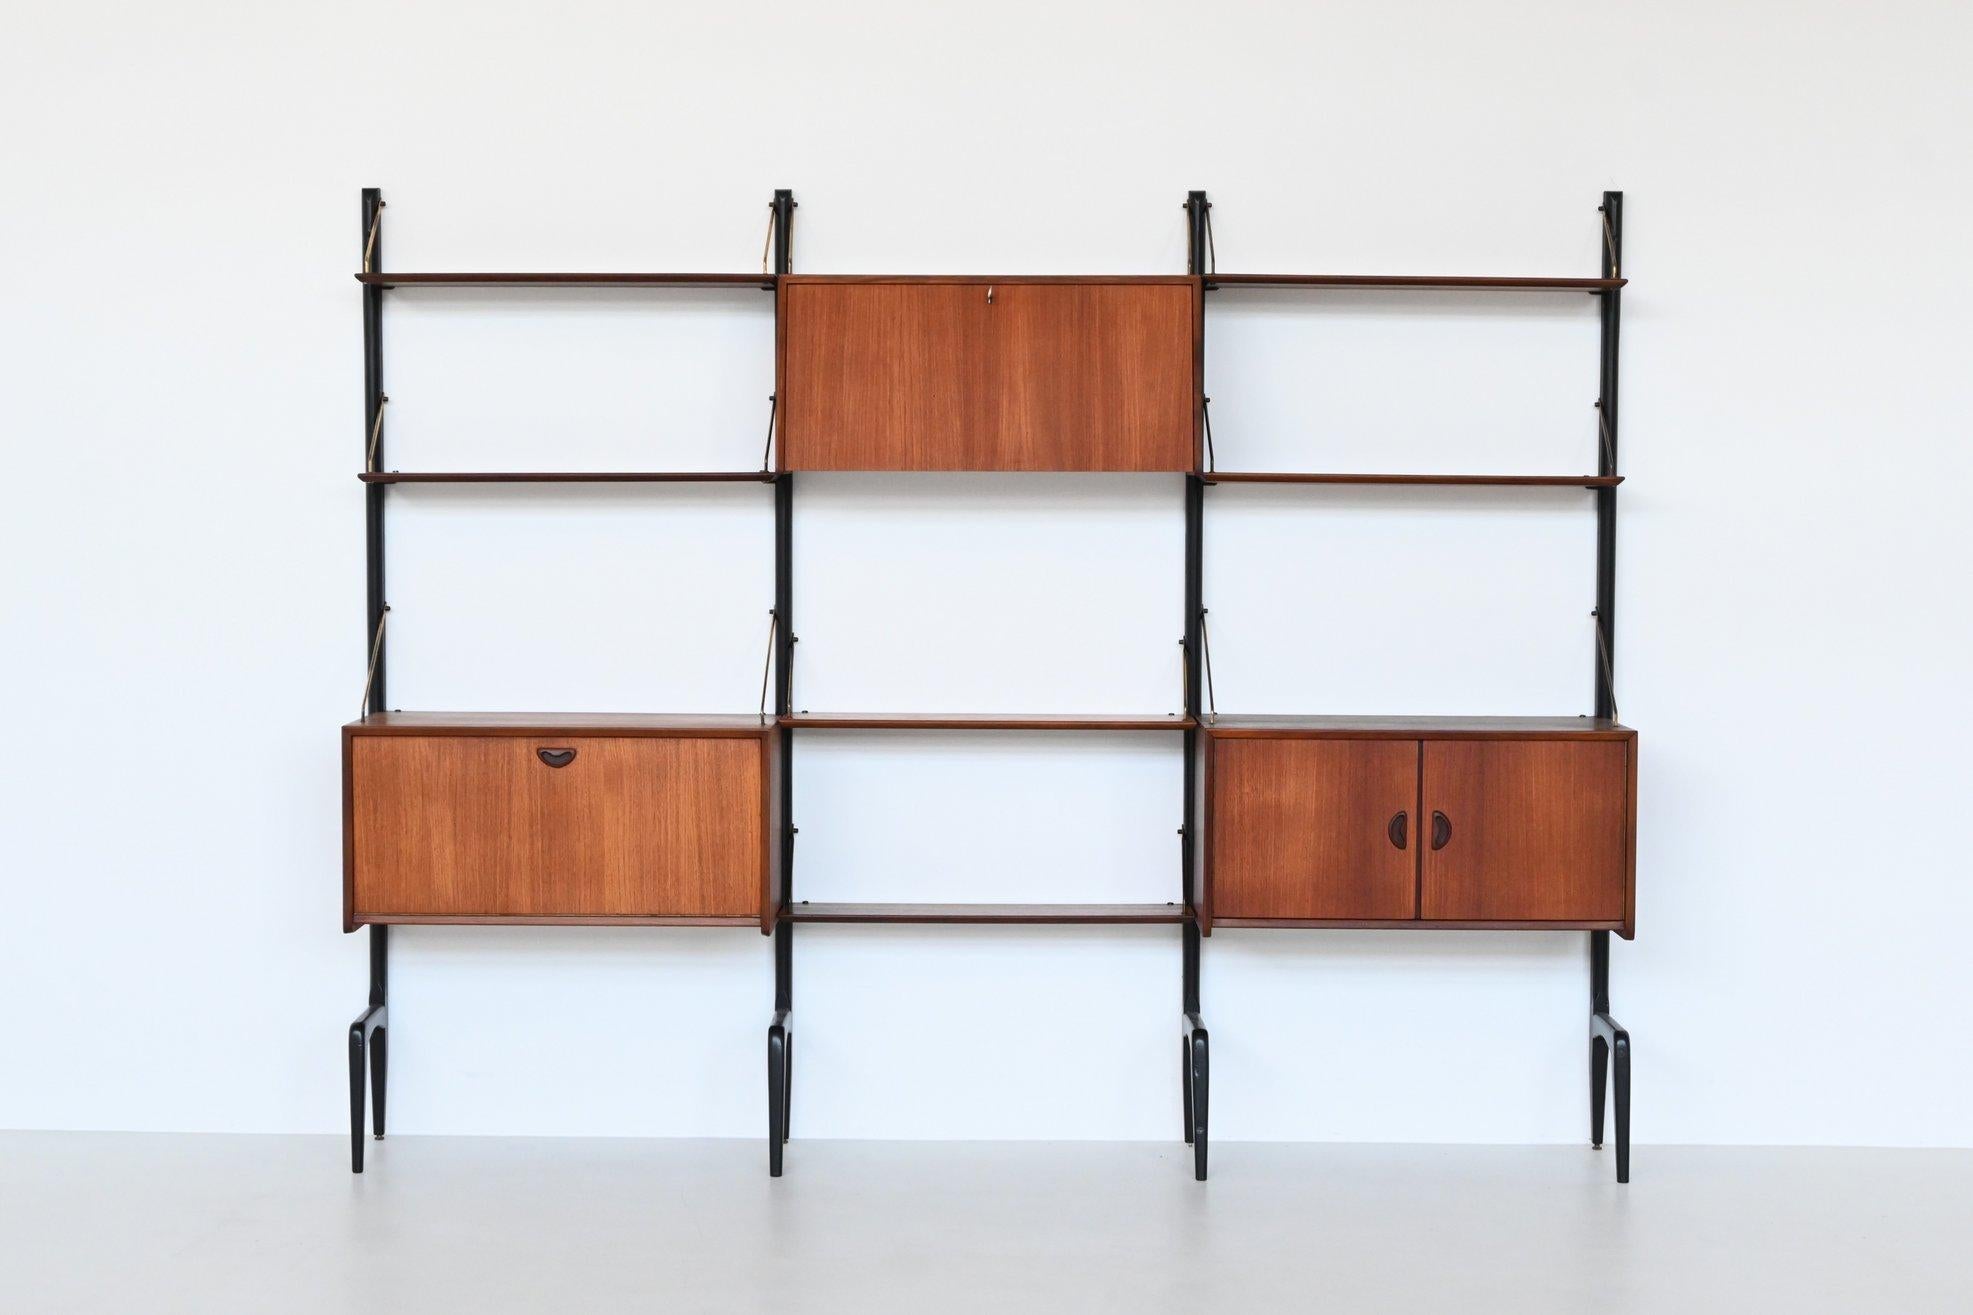 Beautiful large freestanding wall unit designed by Louis van Teeffelen for Webe, The Netherlands 1960. This highly versatile and functional wall system offers a variety of storage and display options. It is made of veneered teak wood in combination